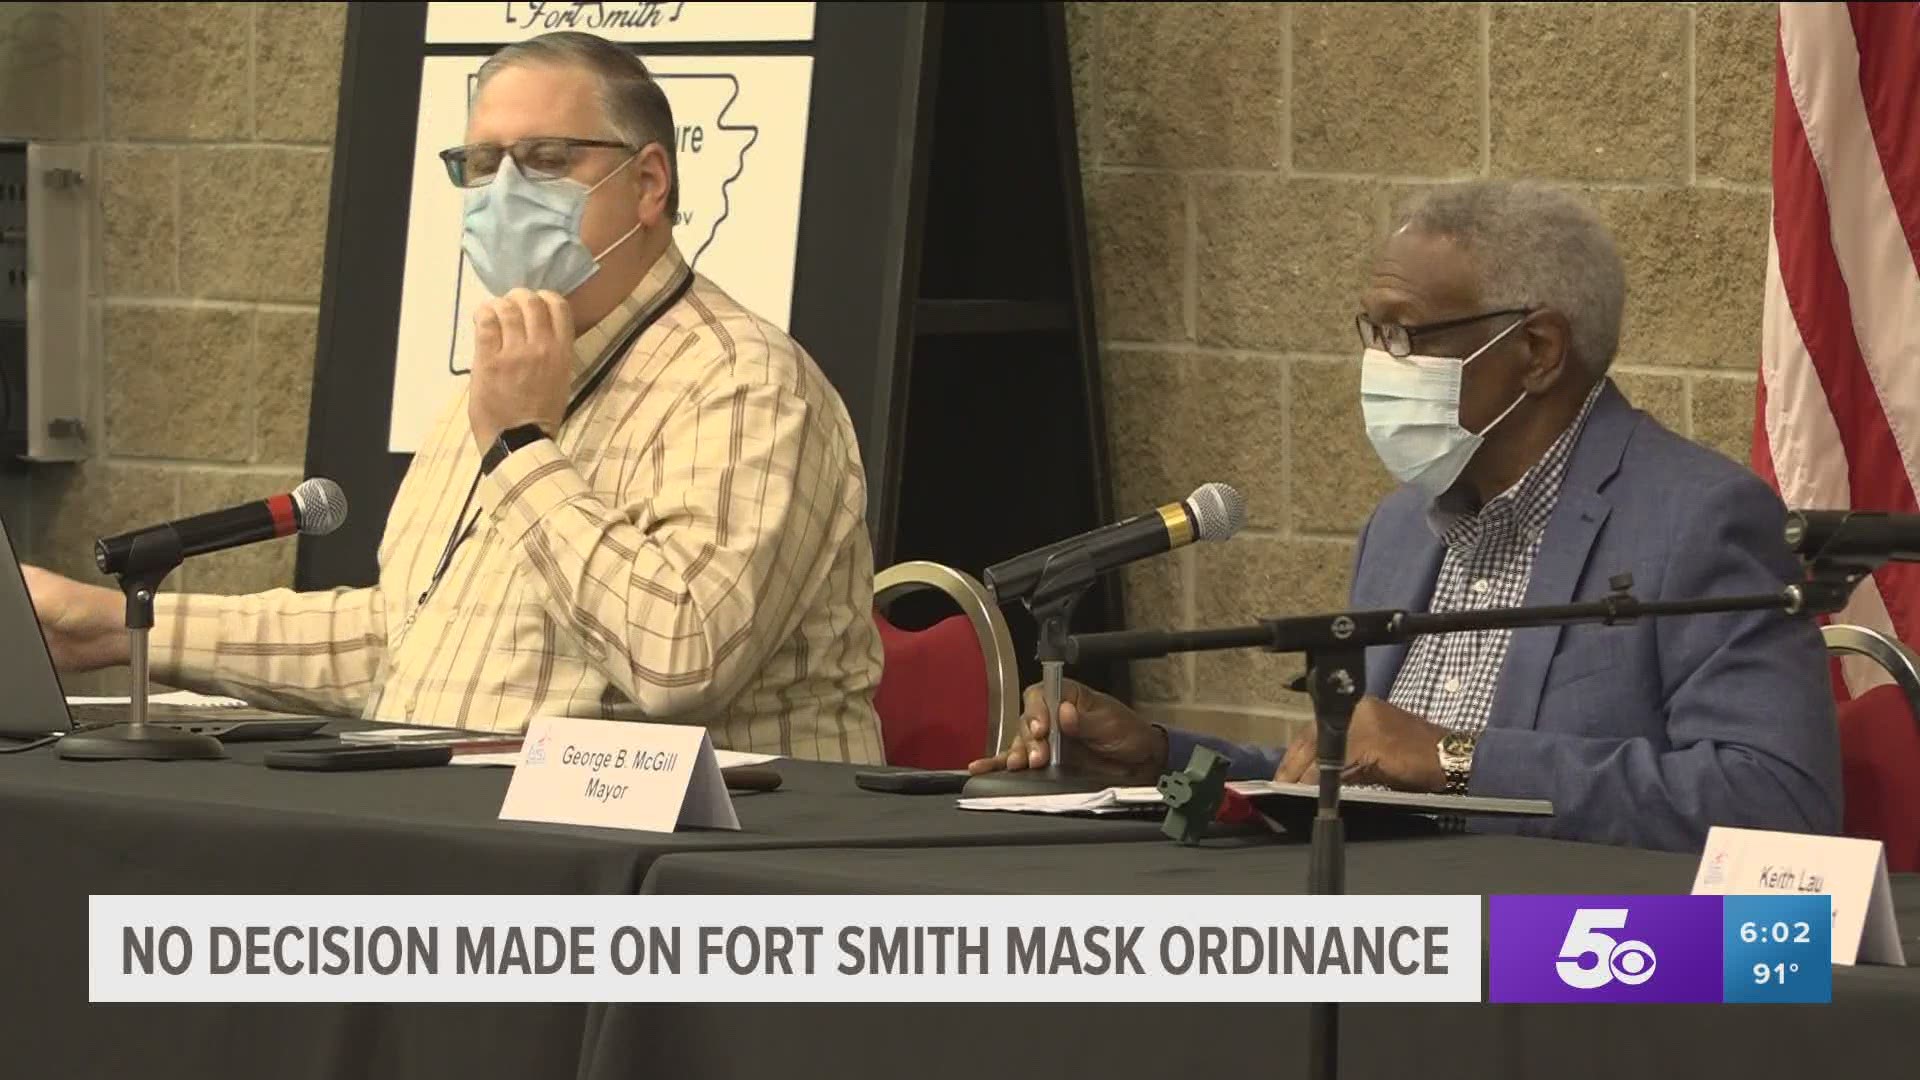 No decision made on Fort Smith mask ordinance.